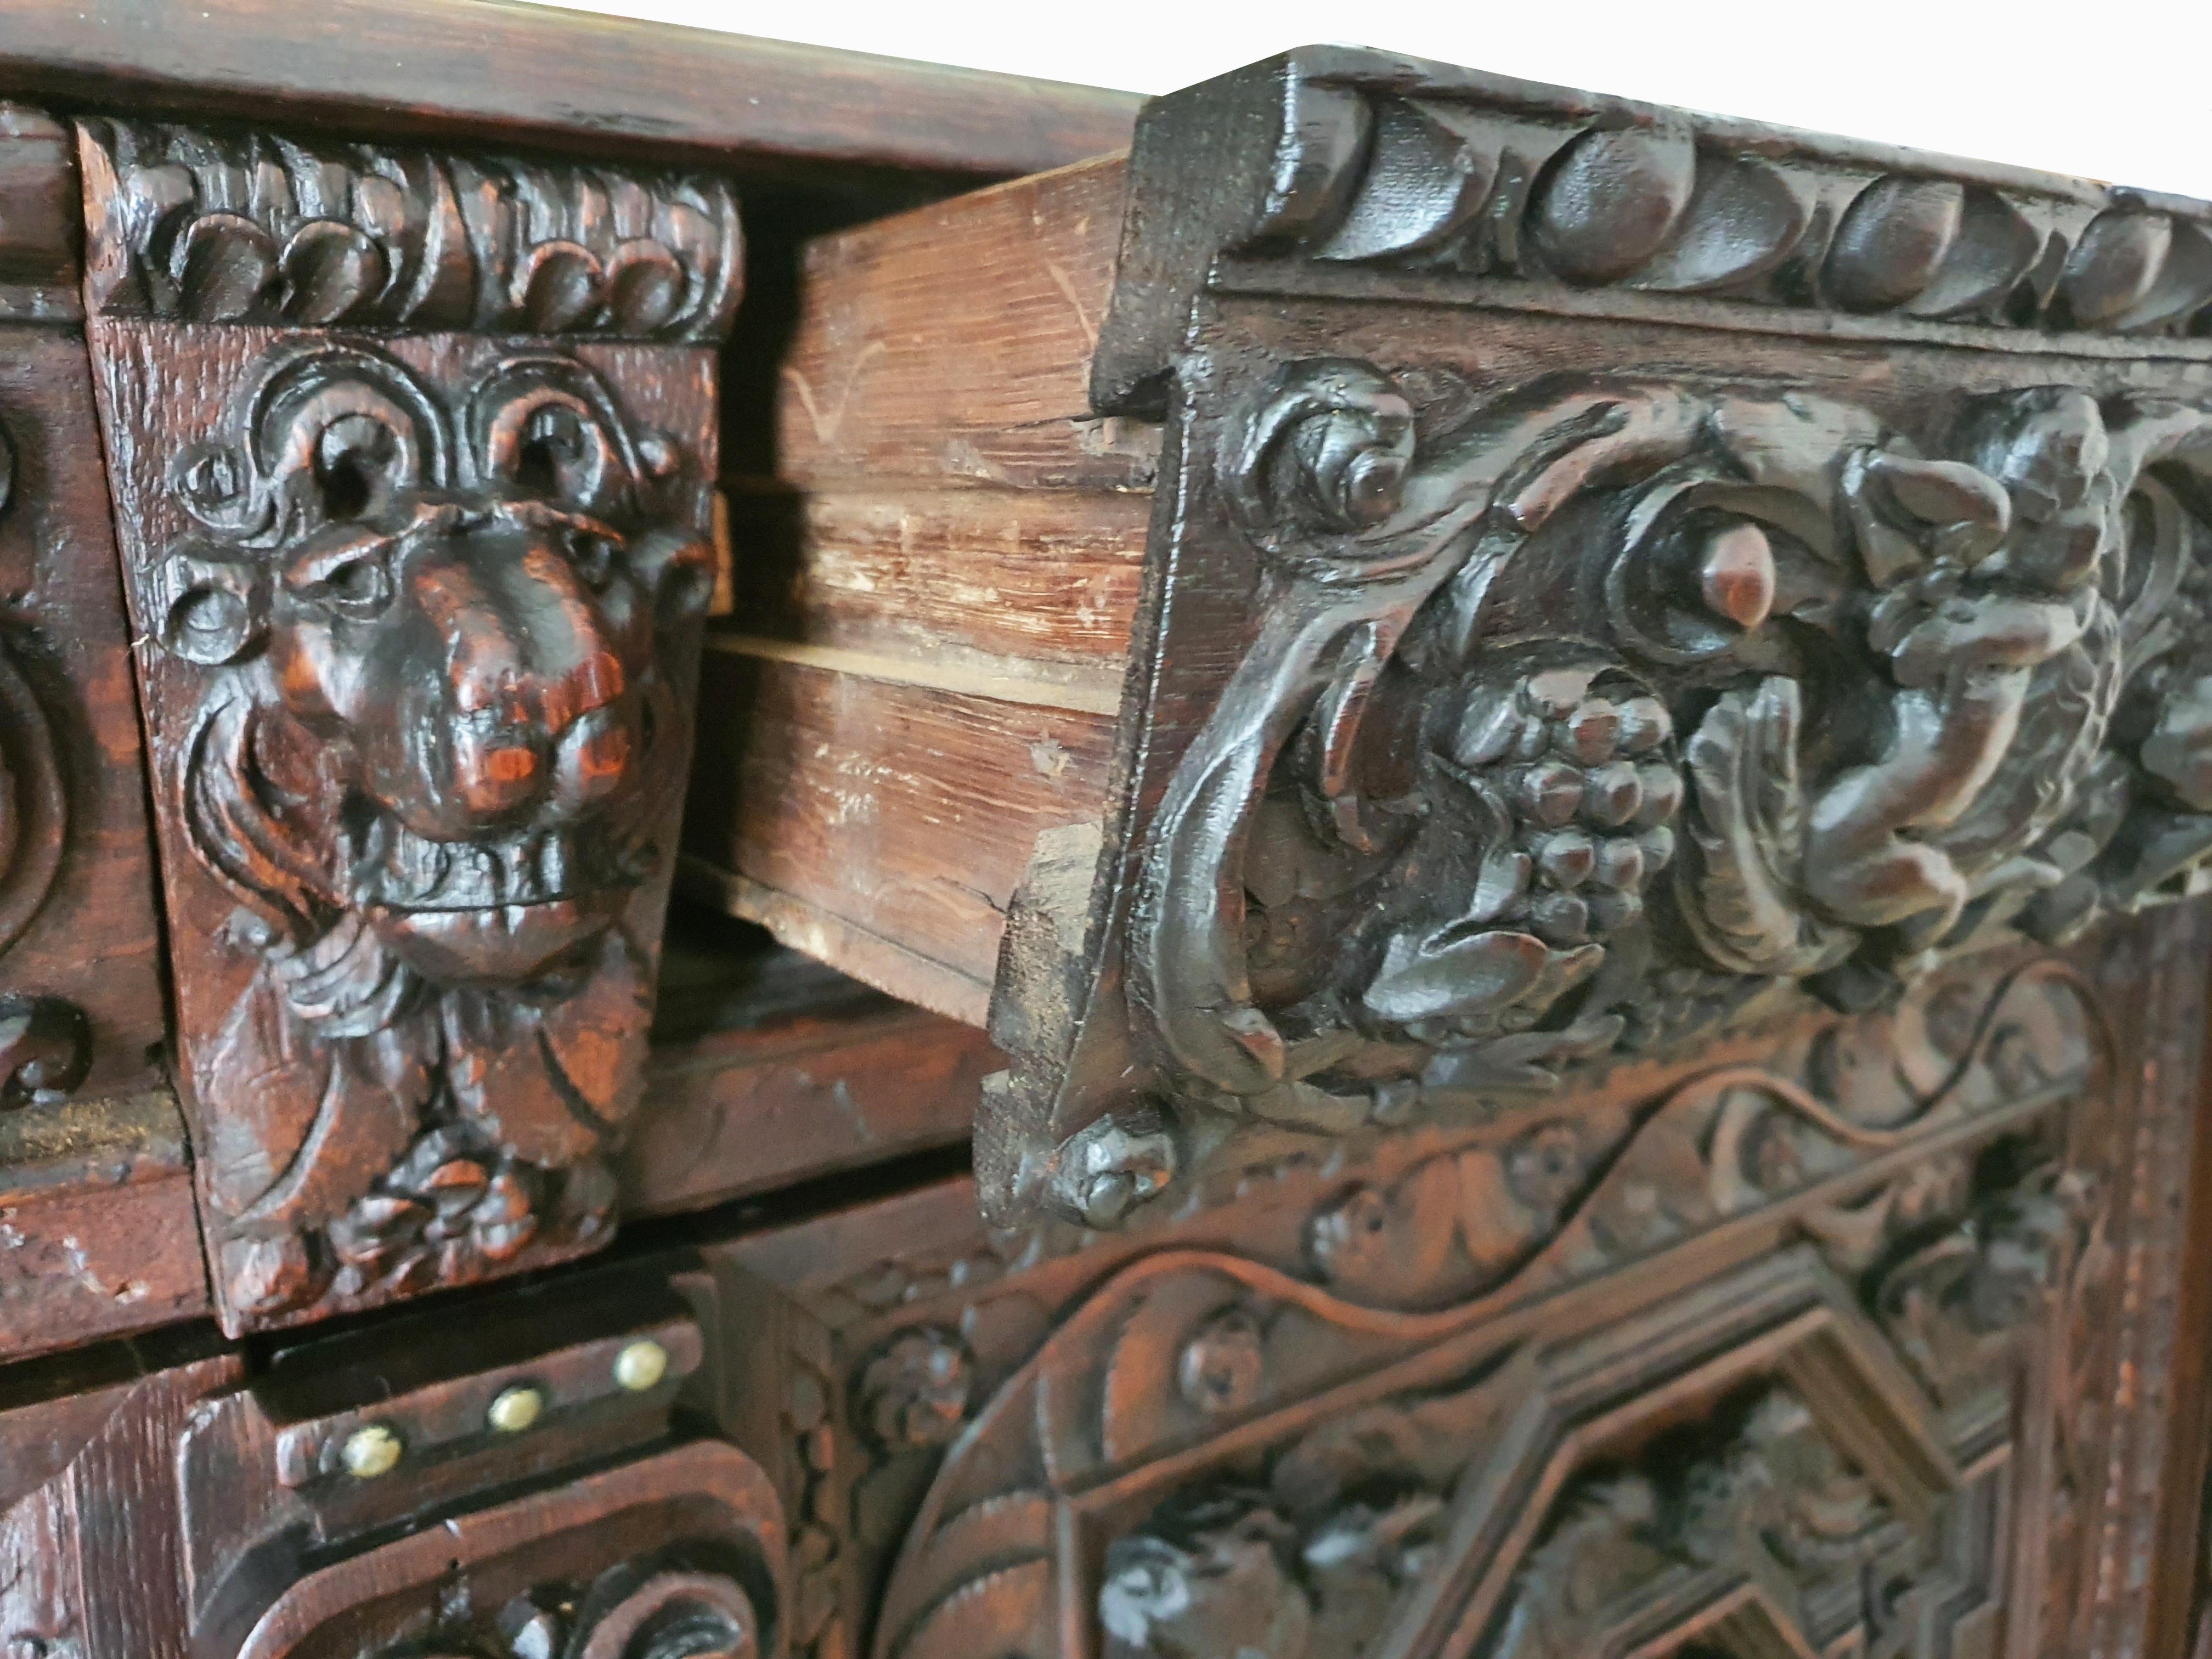 Outstanding 17th Century Flemish Oak Buffet of Impressive proportions. With fine, deeply carved drawers displaying putti and floral decoration above a two door cupboard with geometrically applied moldings and winged putti applied to the top corners.